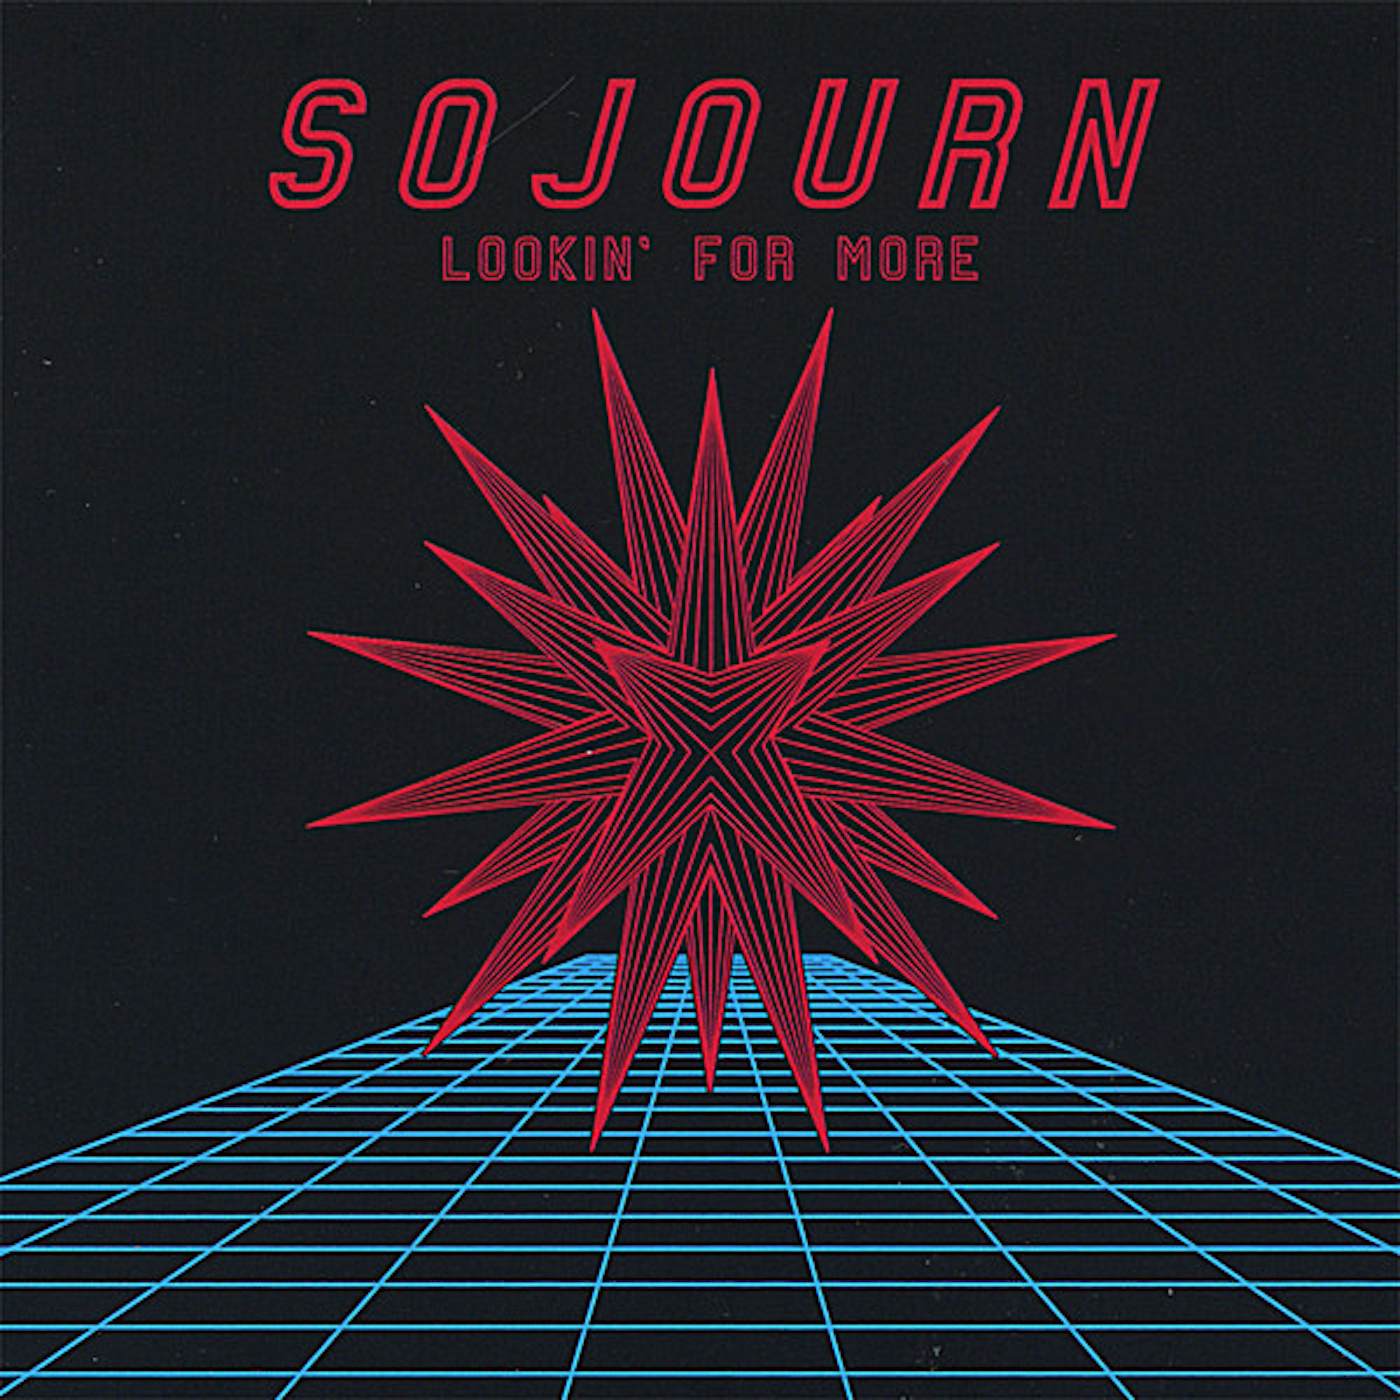 Sojourn LOOKIN FOR MORE CD